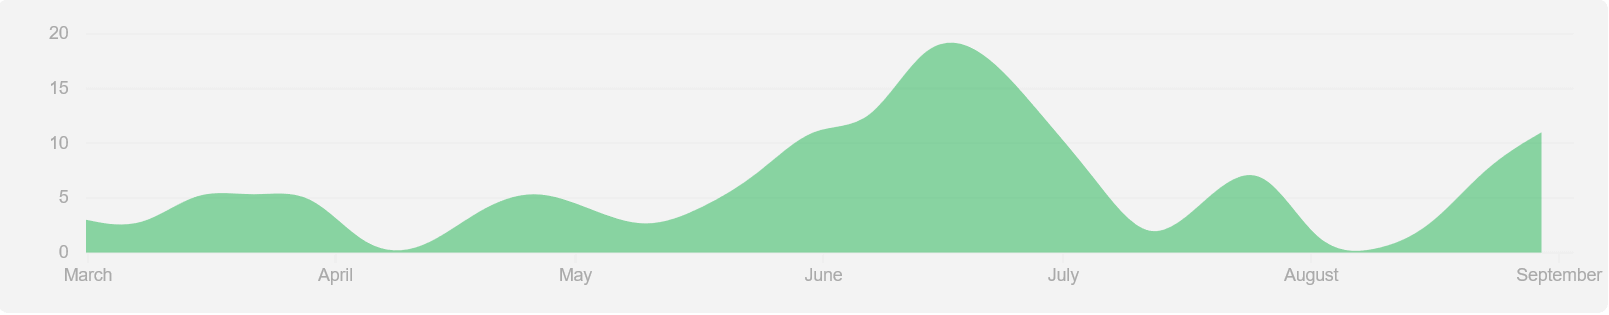 Commit graph for DayTrip from March to September